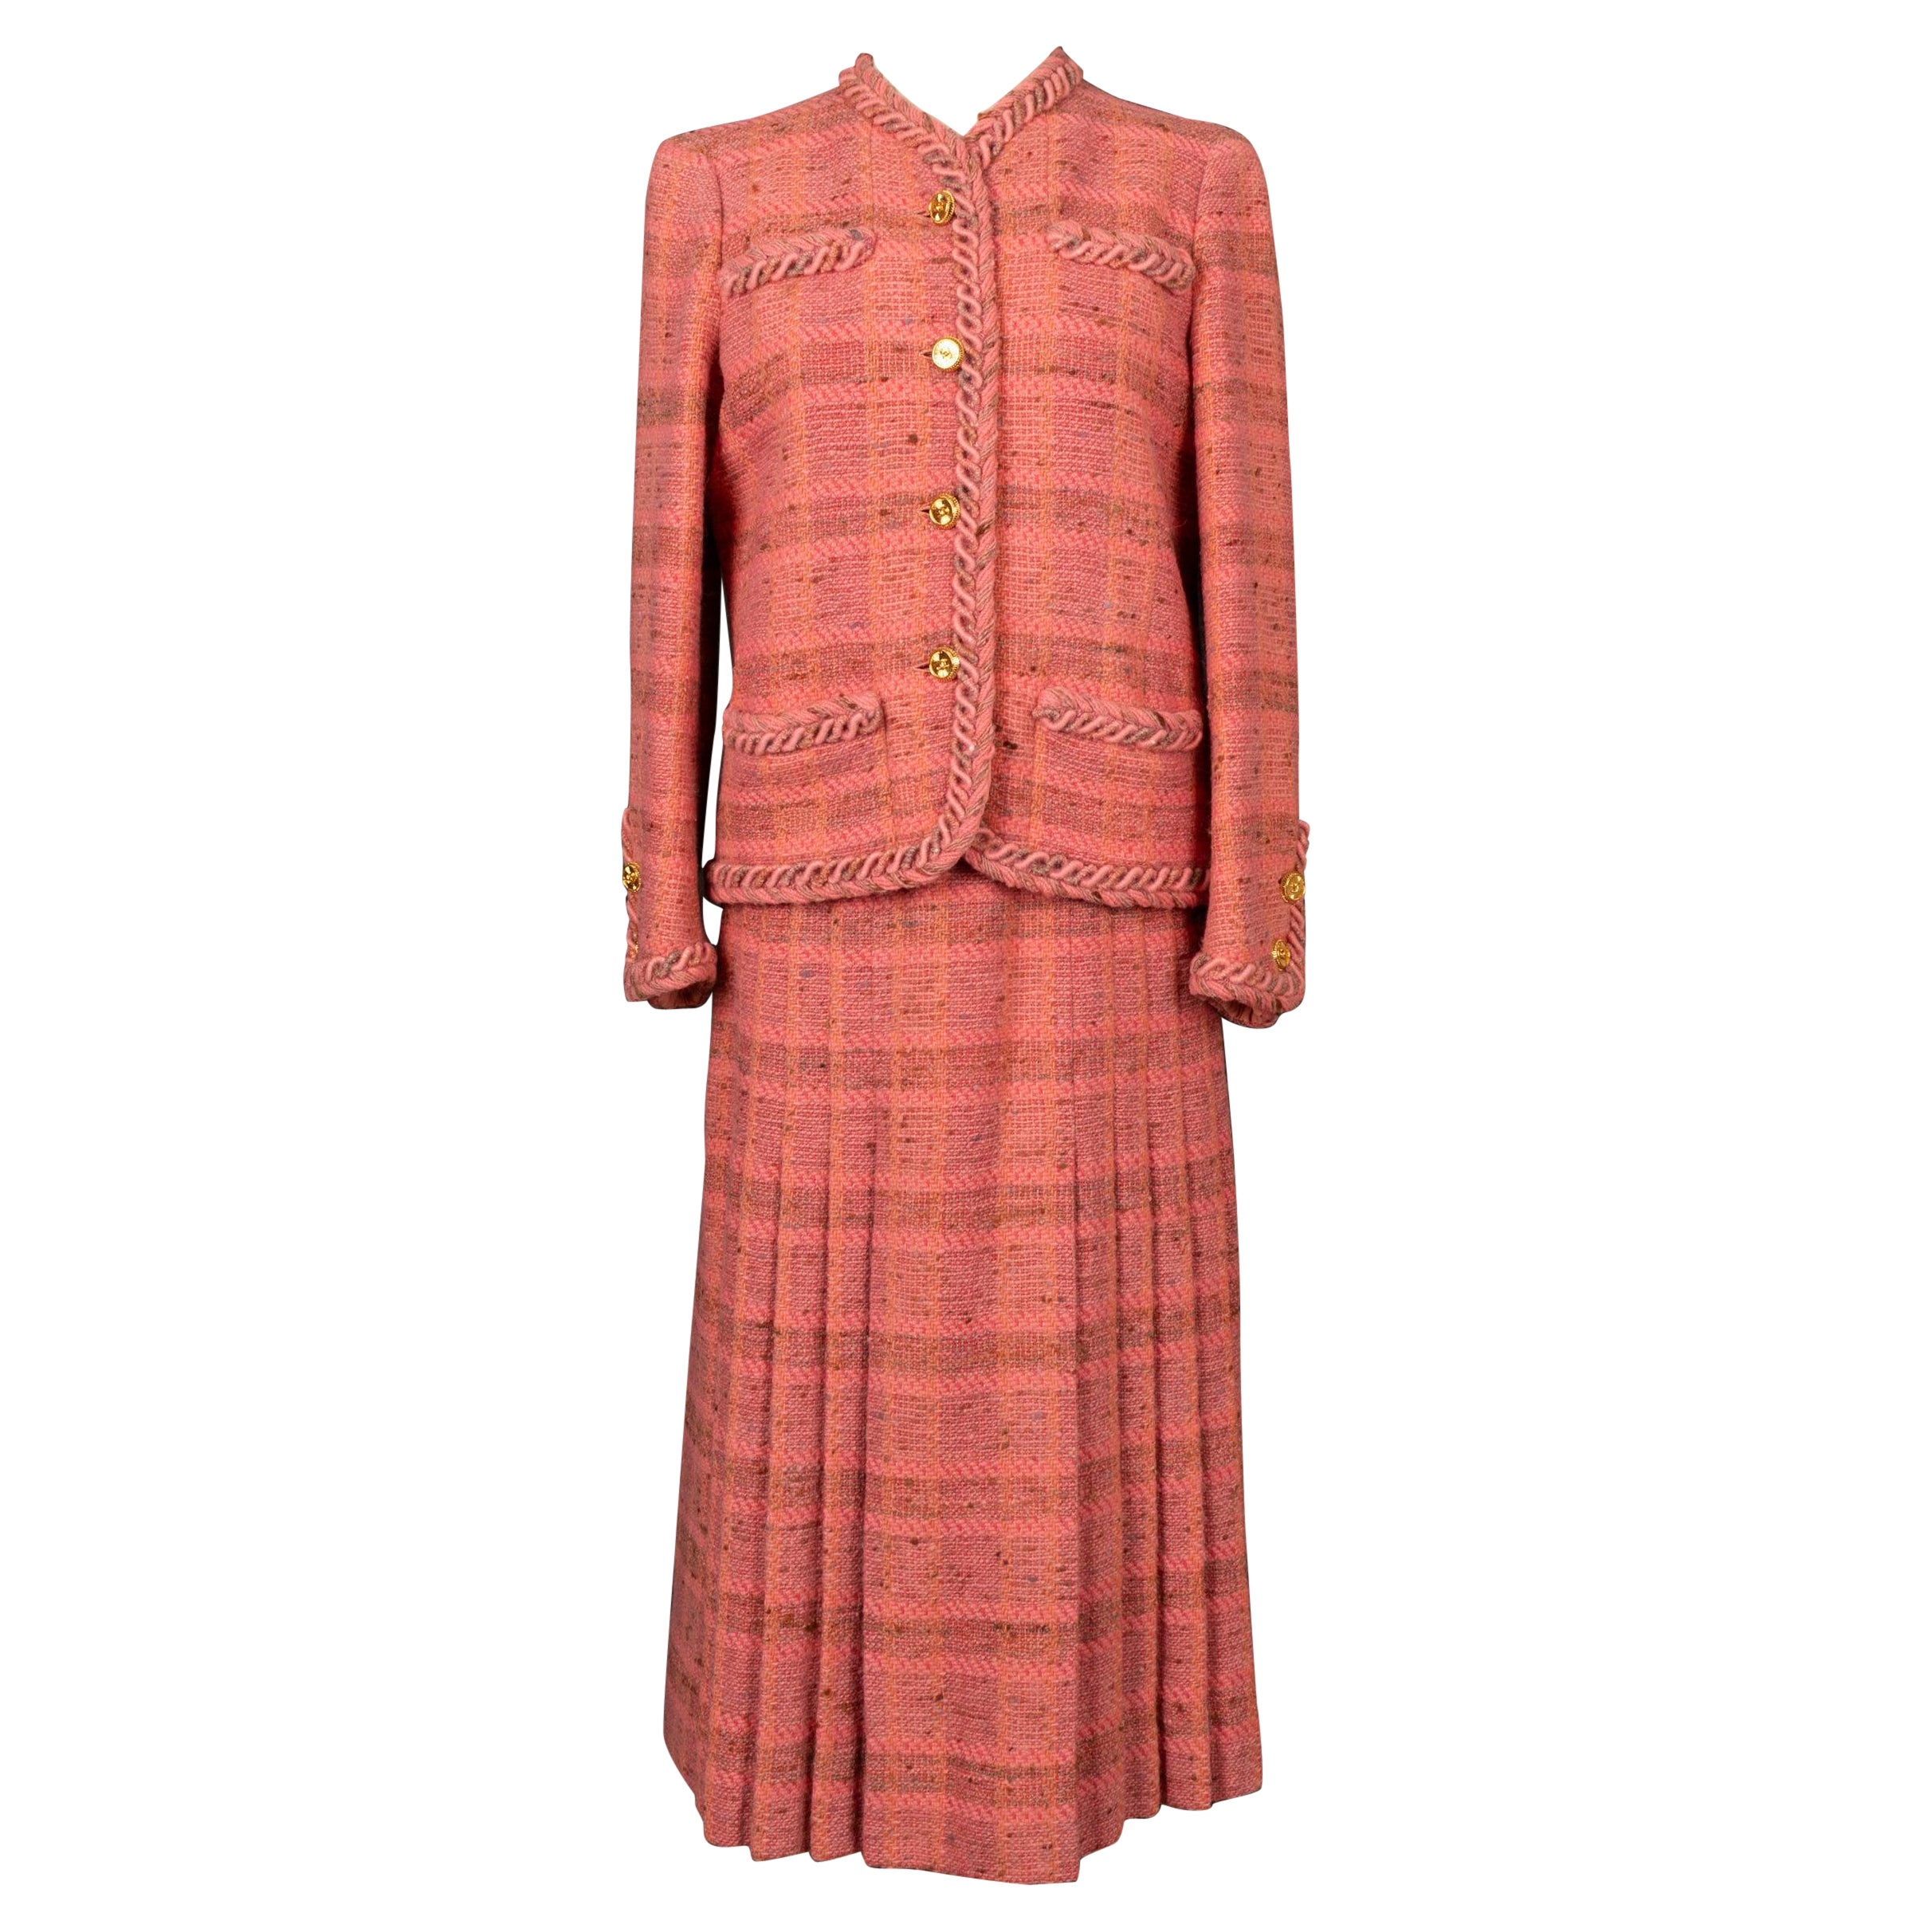 Chanel Haute Couture Suit Set of Pink-Tone Tweed Jacket and Skirt